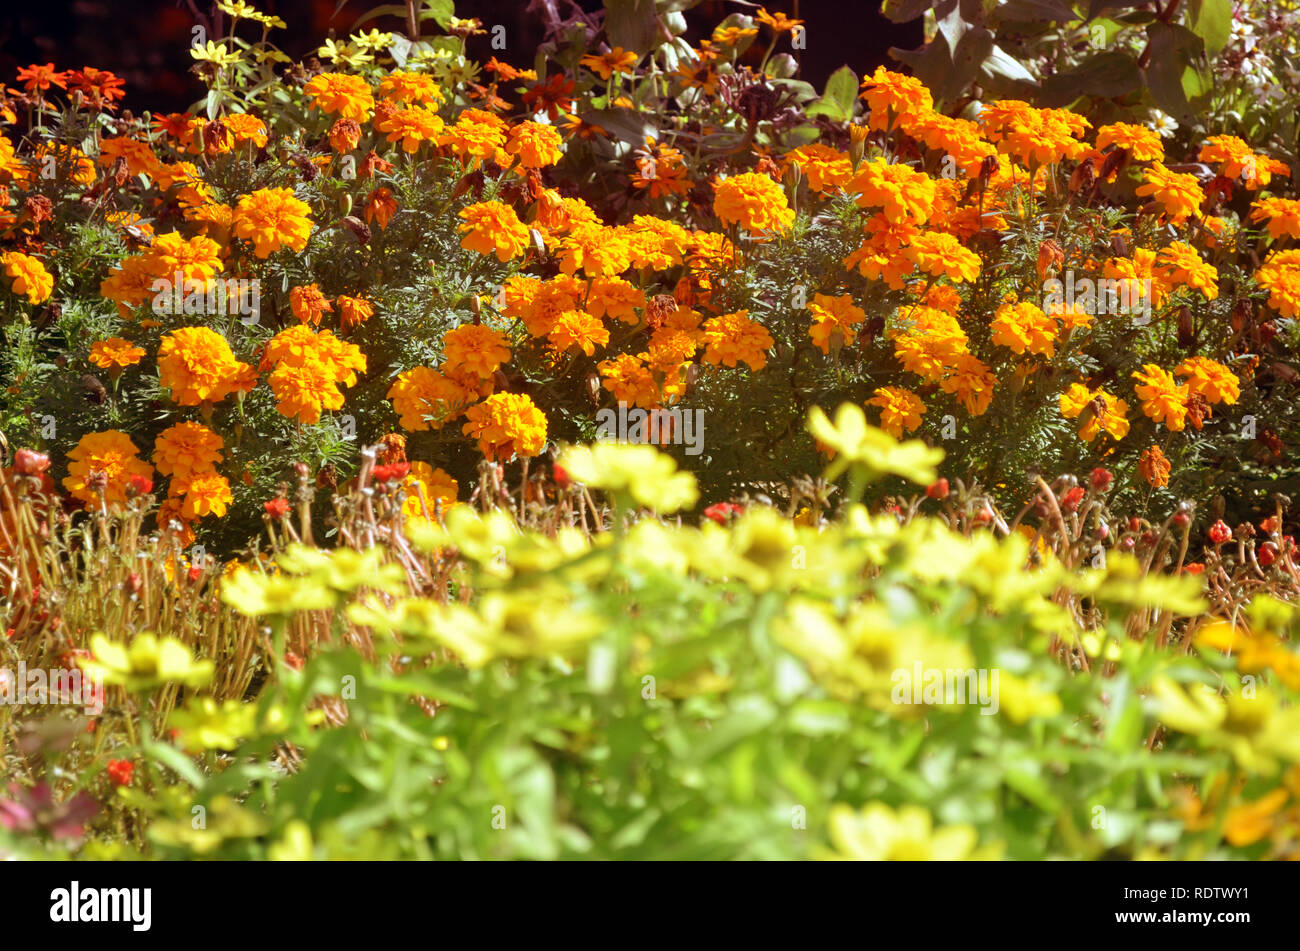 Small flowerbed of mums and yellow flowers Stock Photo